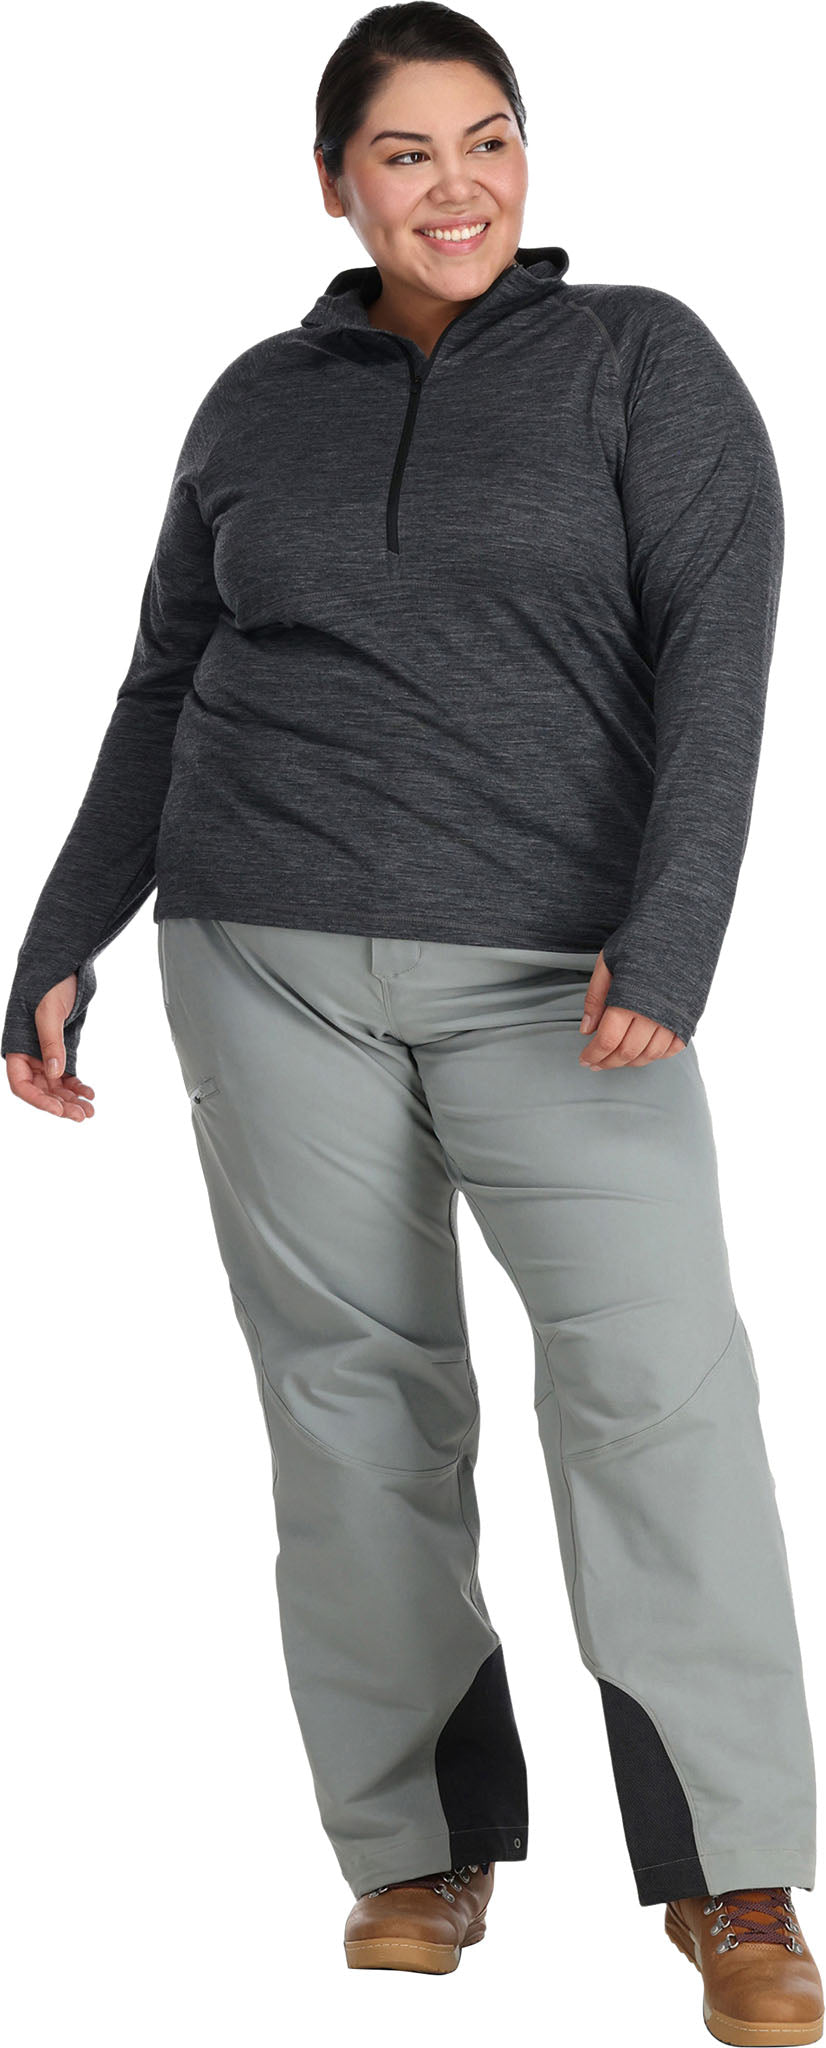 Outdoor Research Cirque II Plus Size Pants - Women's